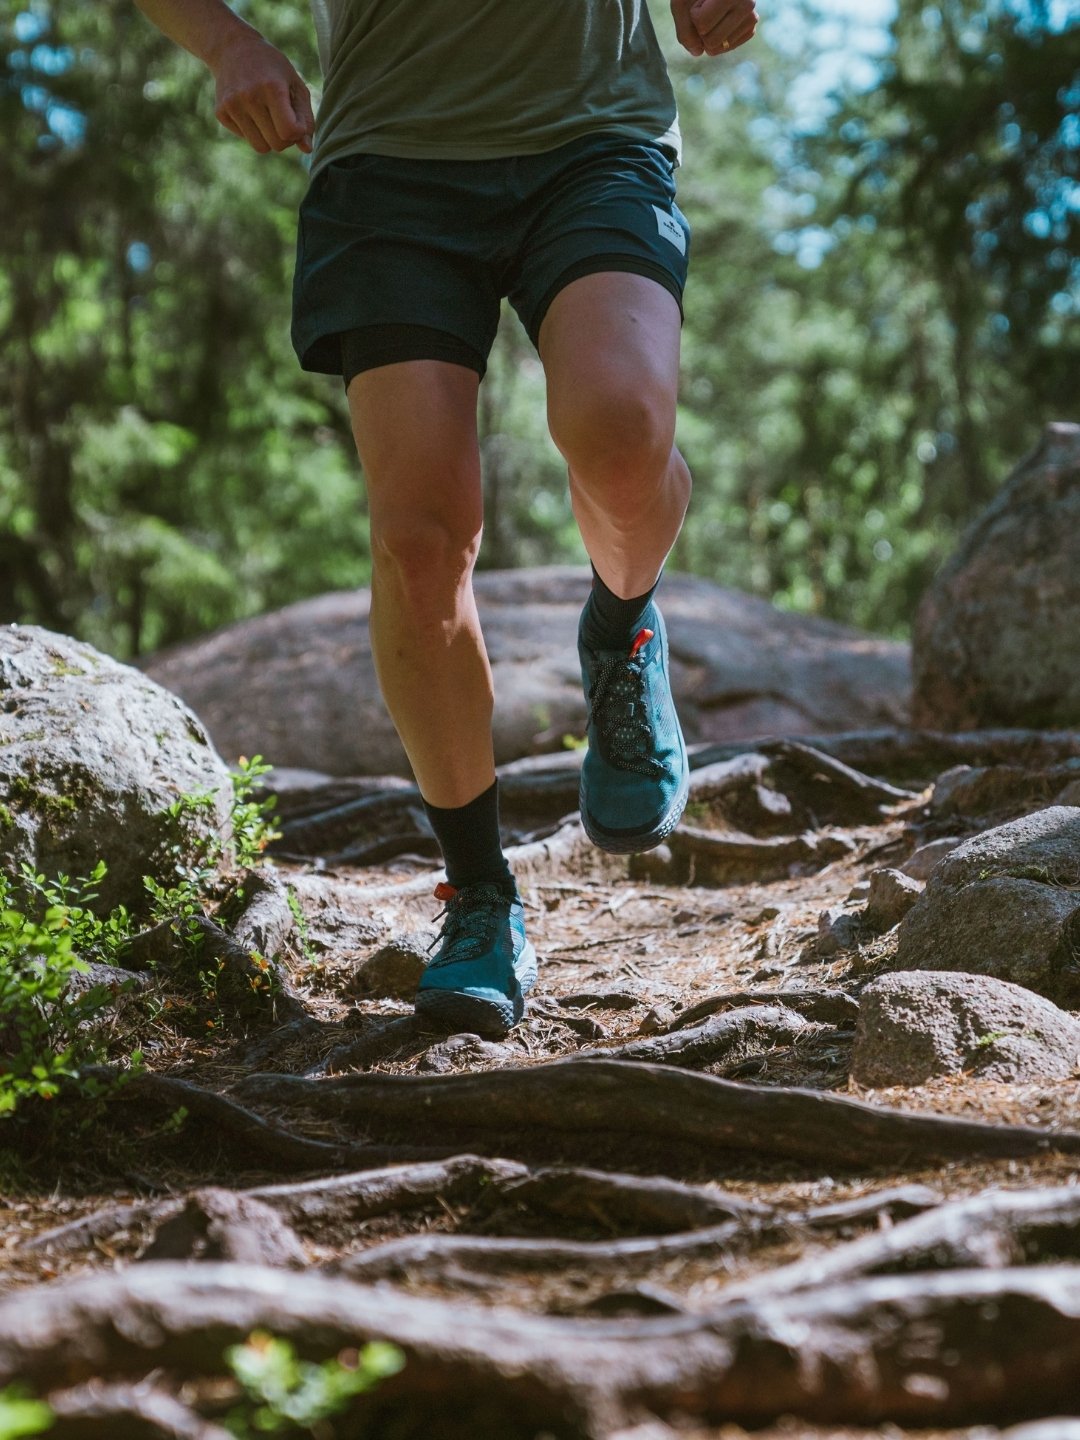 KARHU trail running shoe on rocky terrain with roots